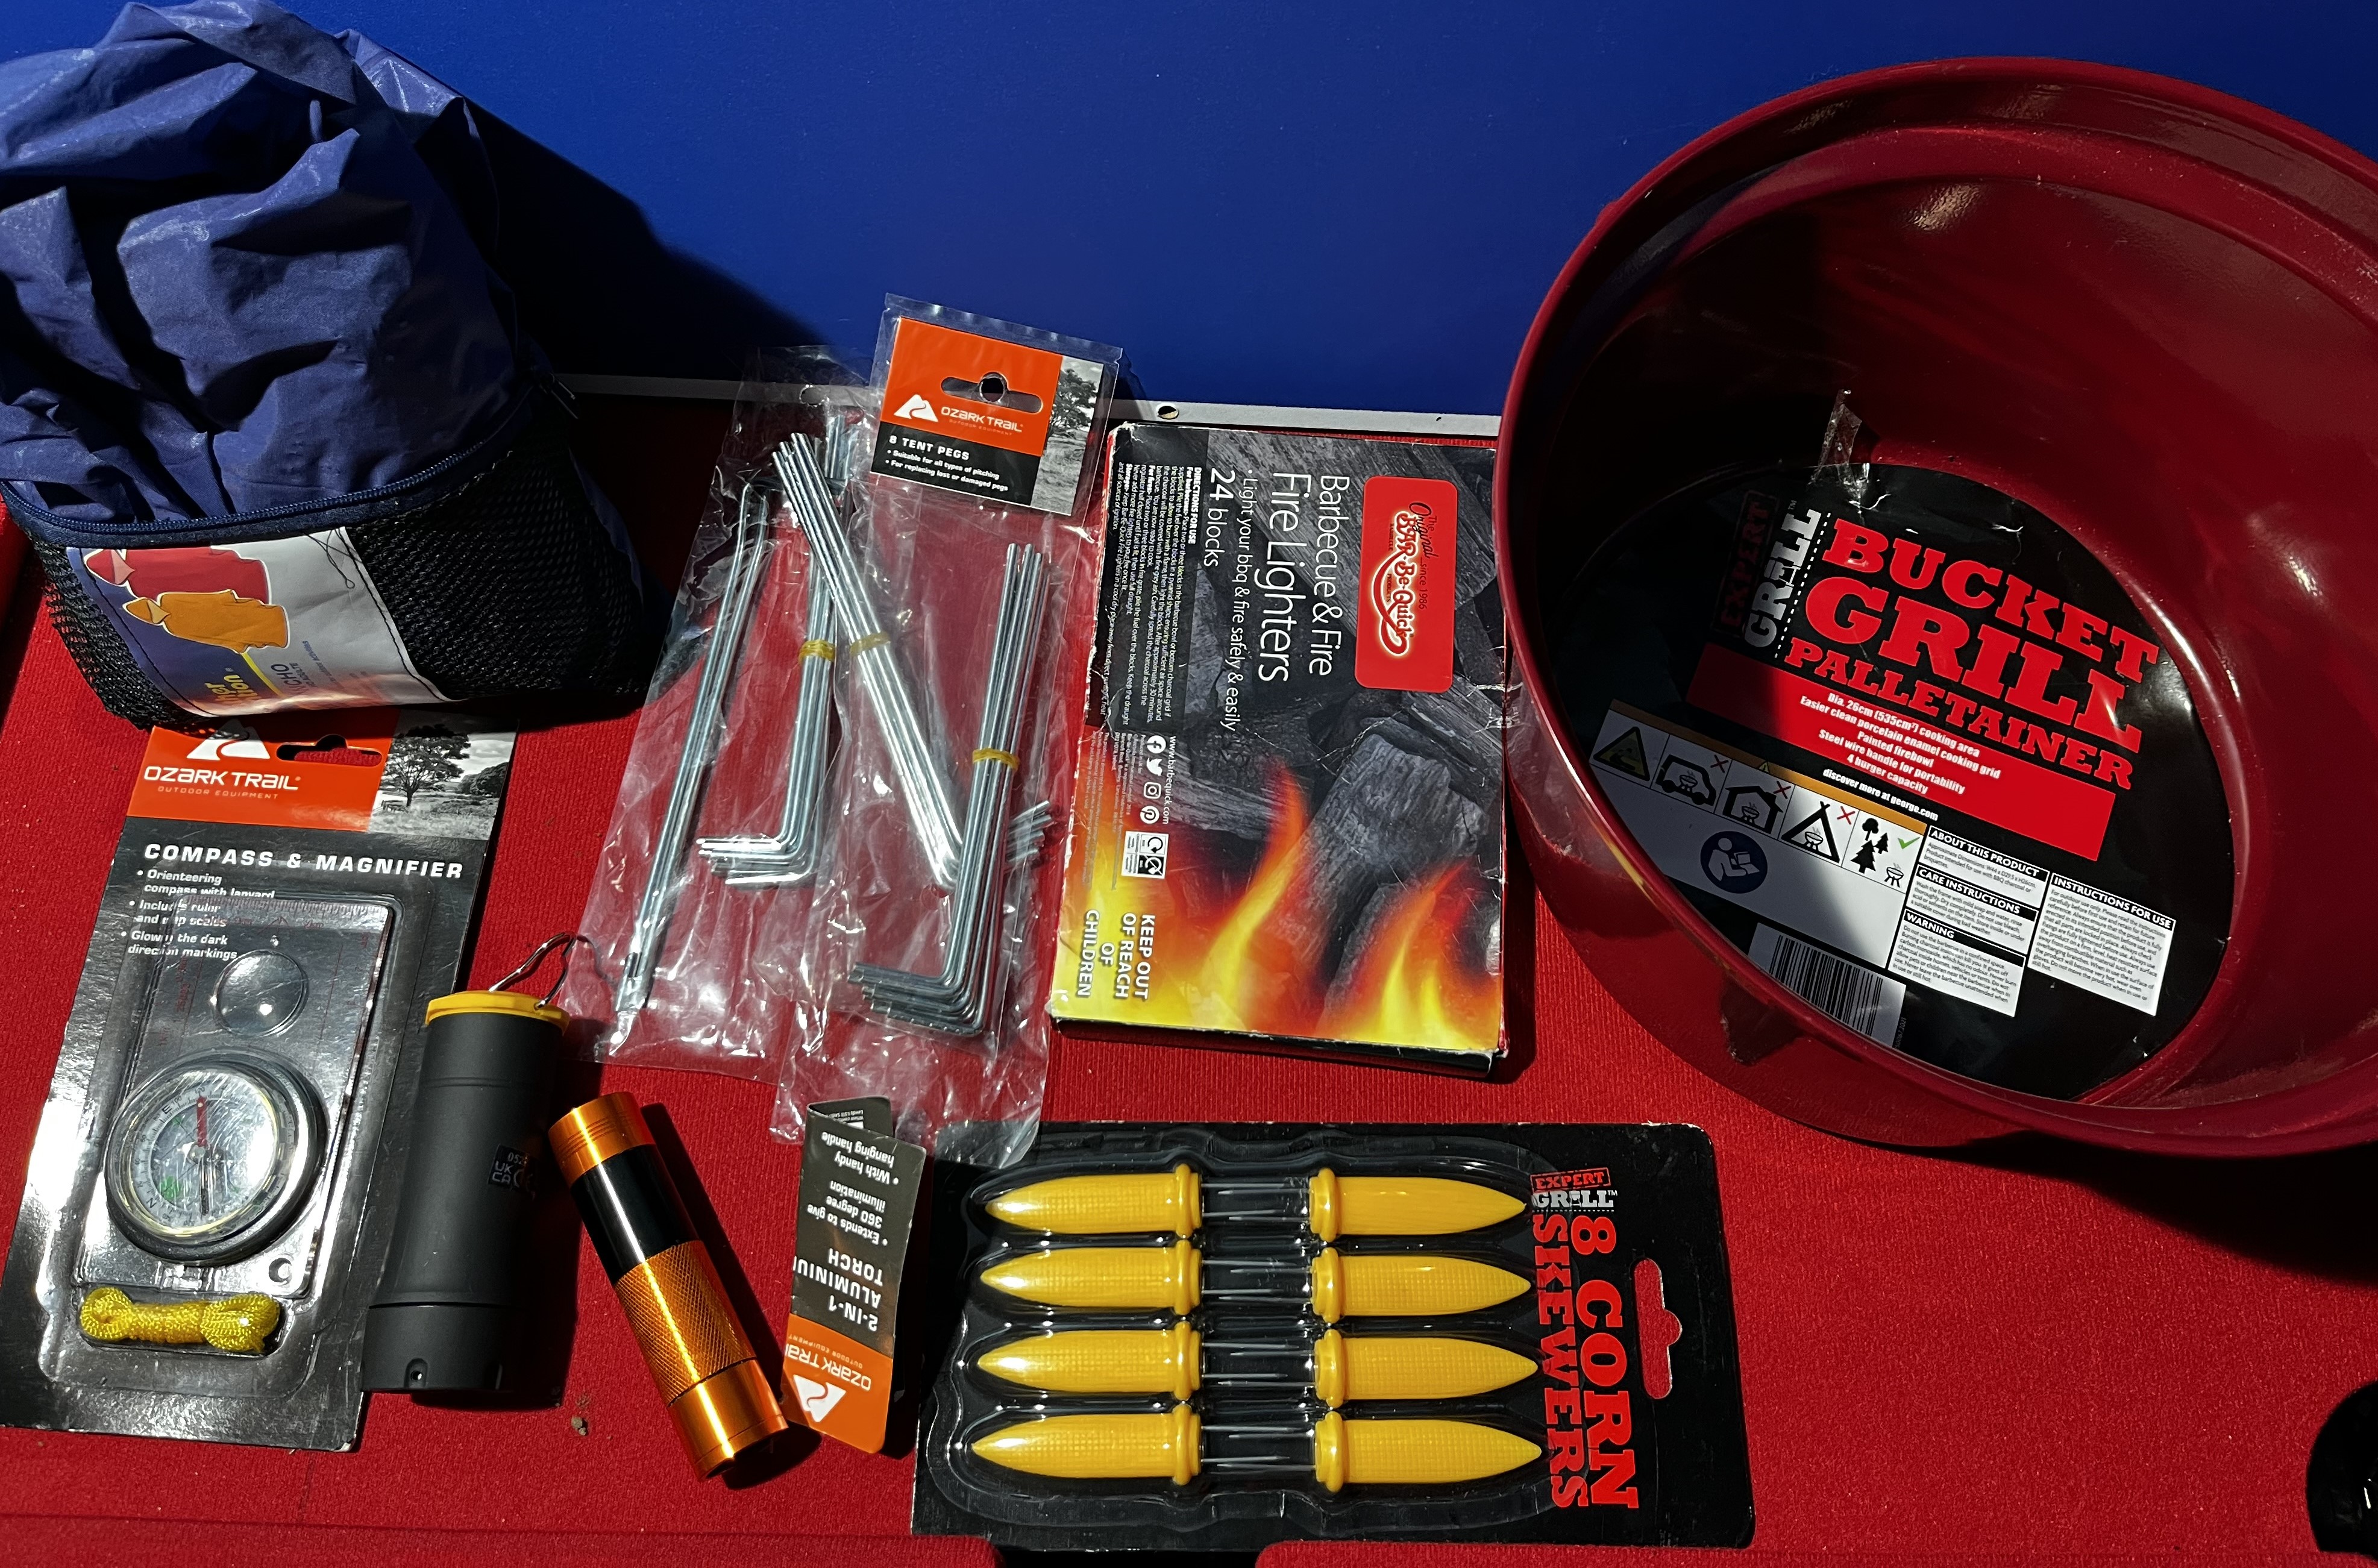 J1/D - Camping & BBQ Accessories, Grill Bucket, Corn Skewers, Tent Pags, Compass, Torches + Rainm...